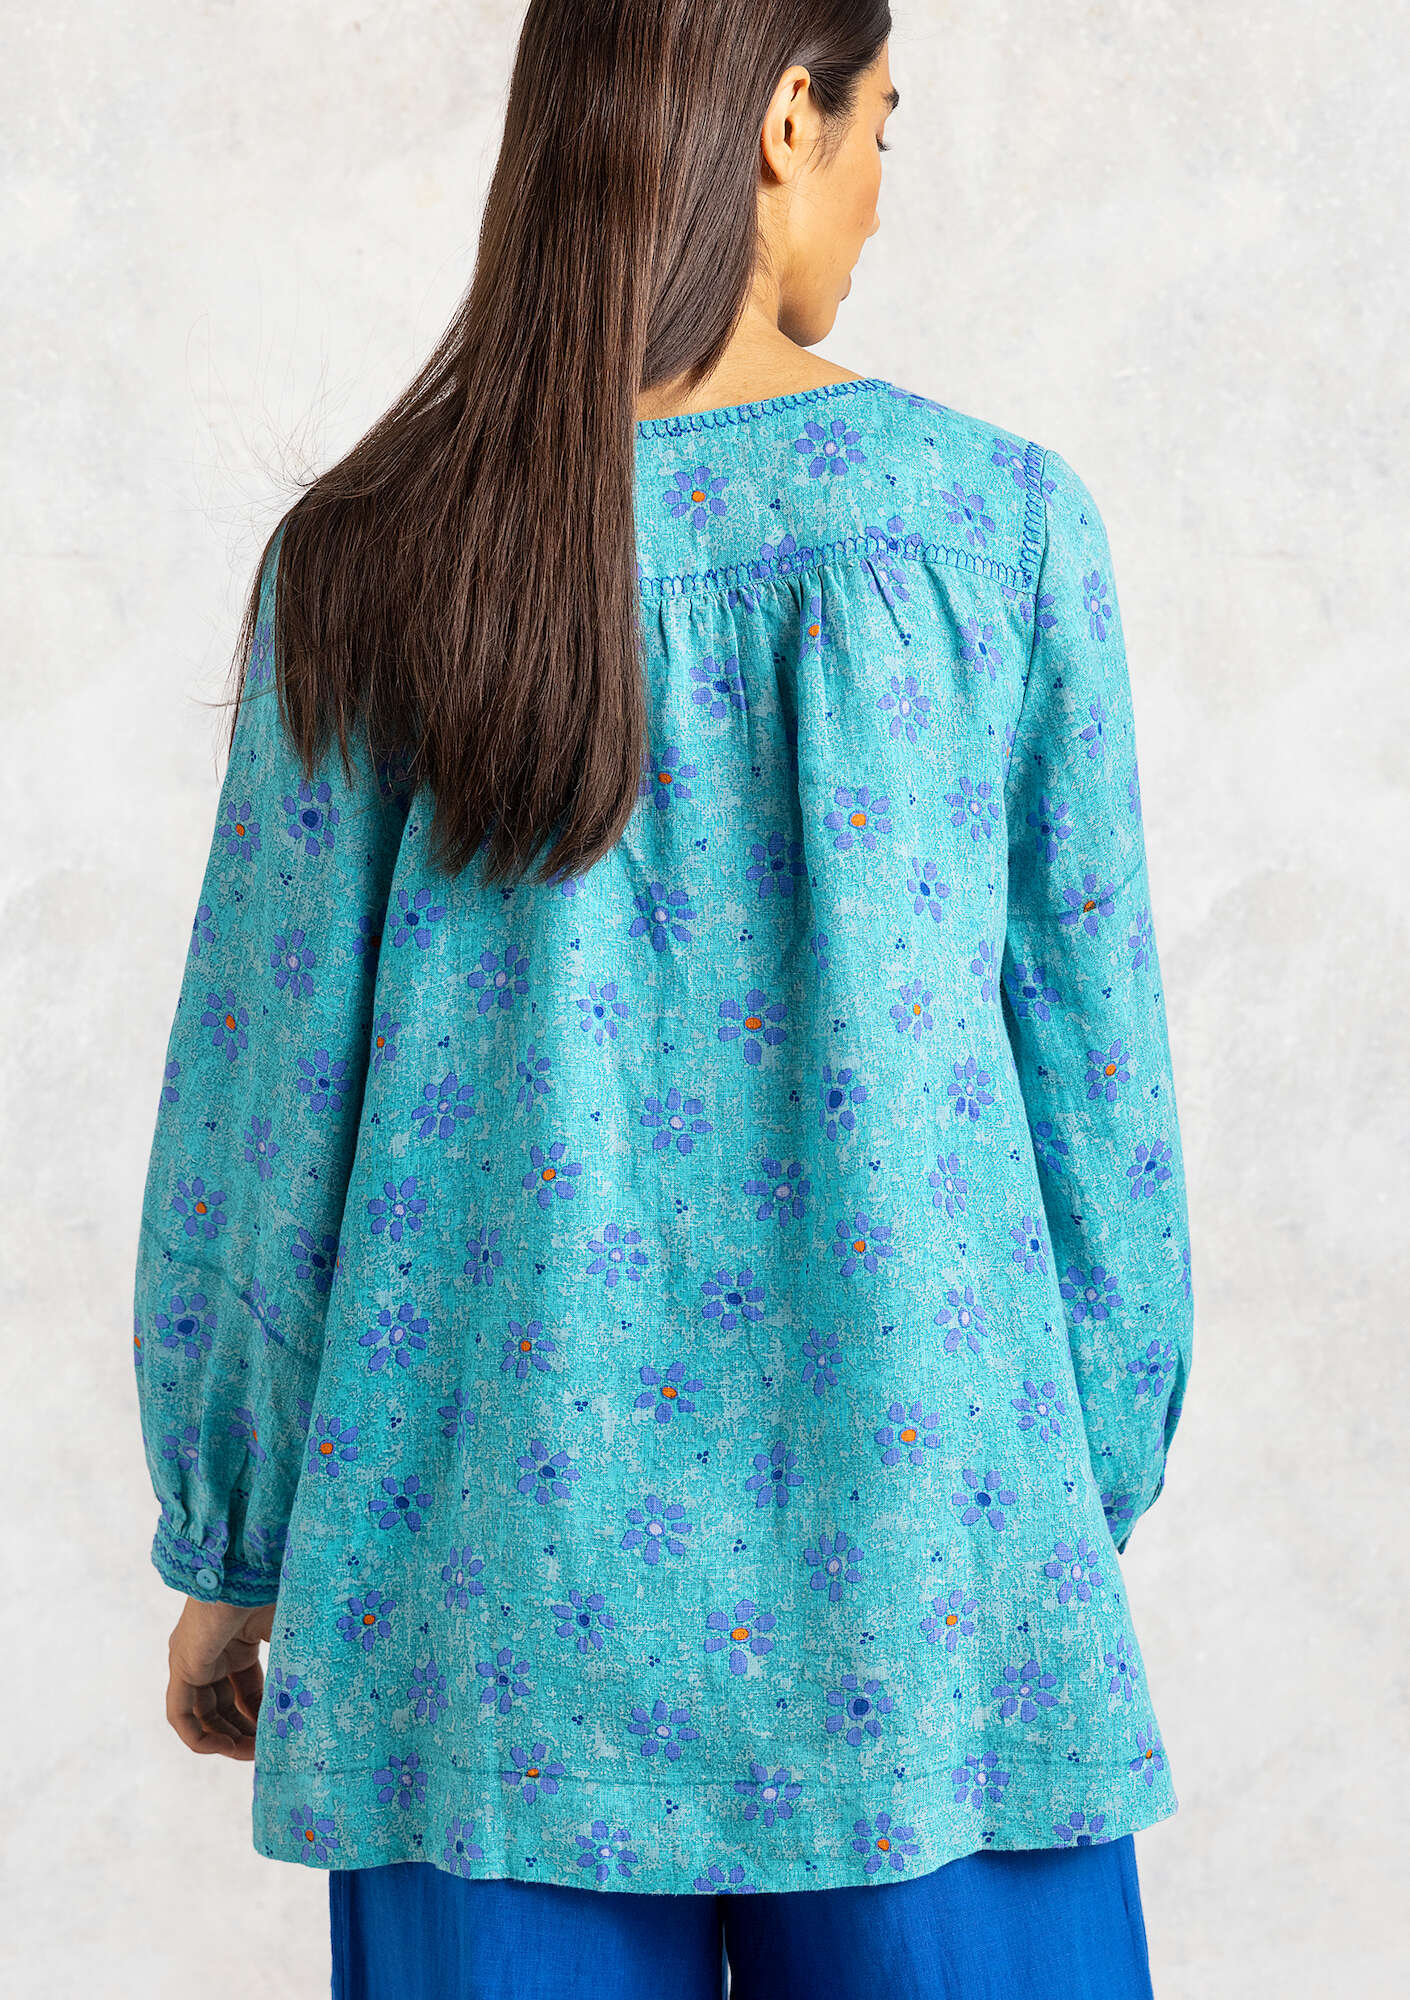 Ester blouse meadow stream/patterned